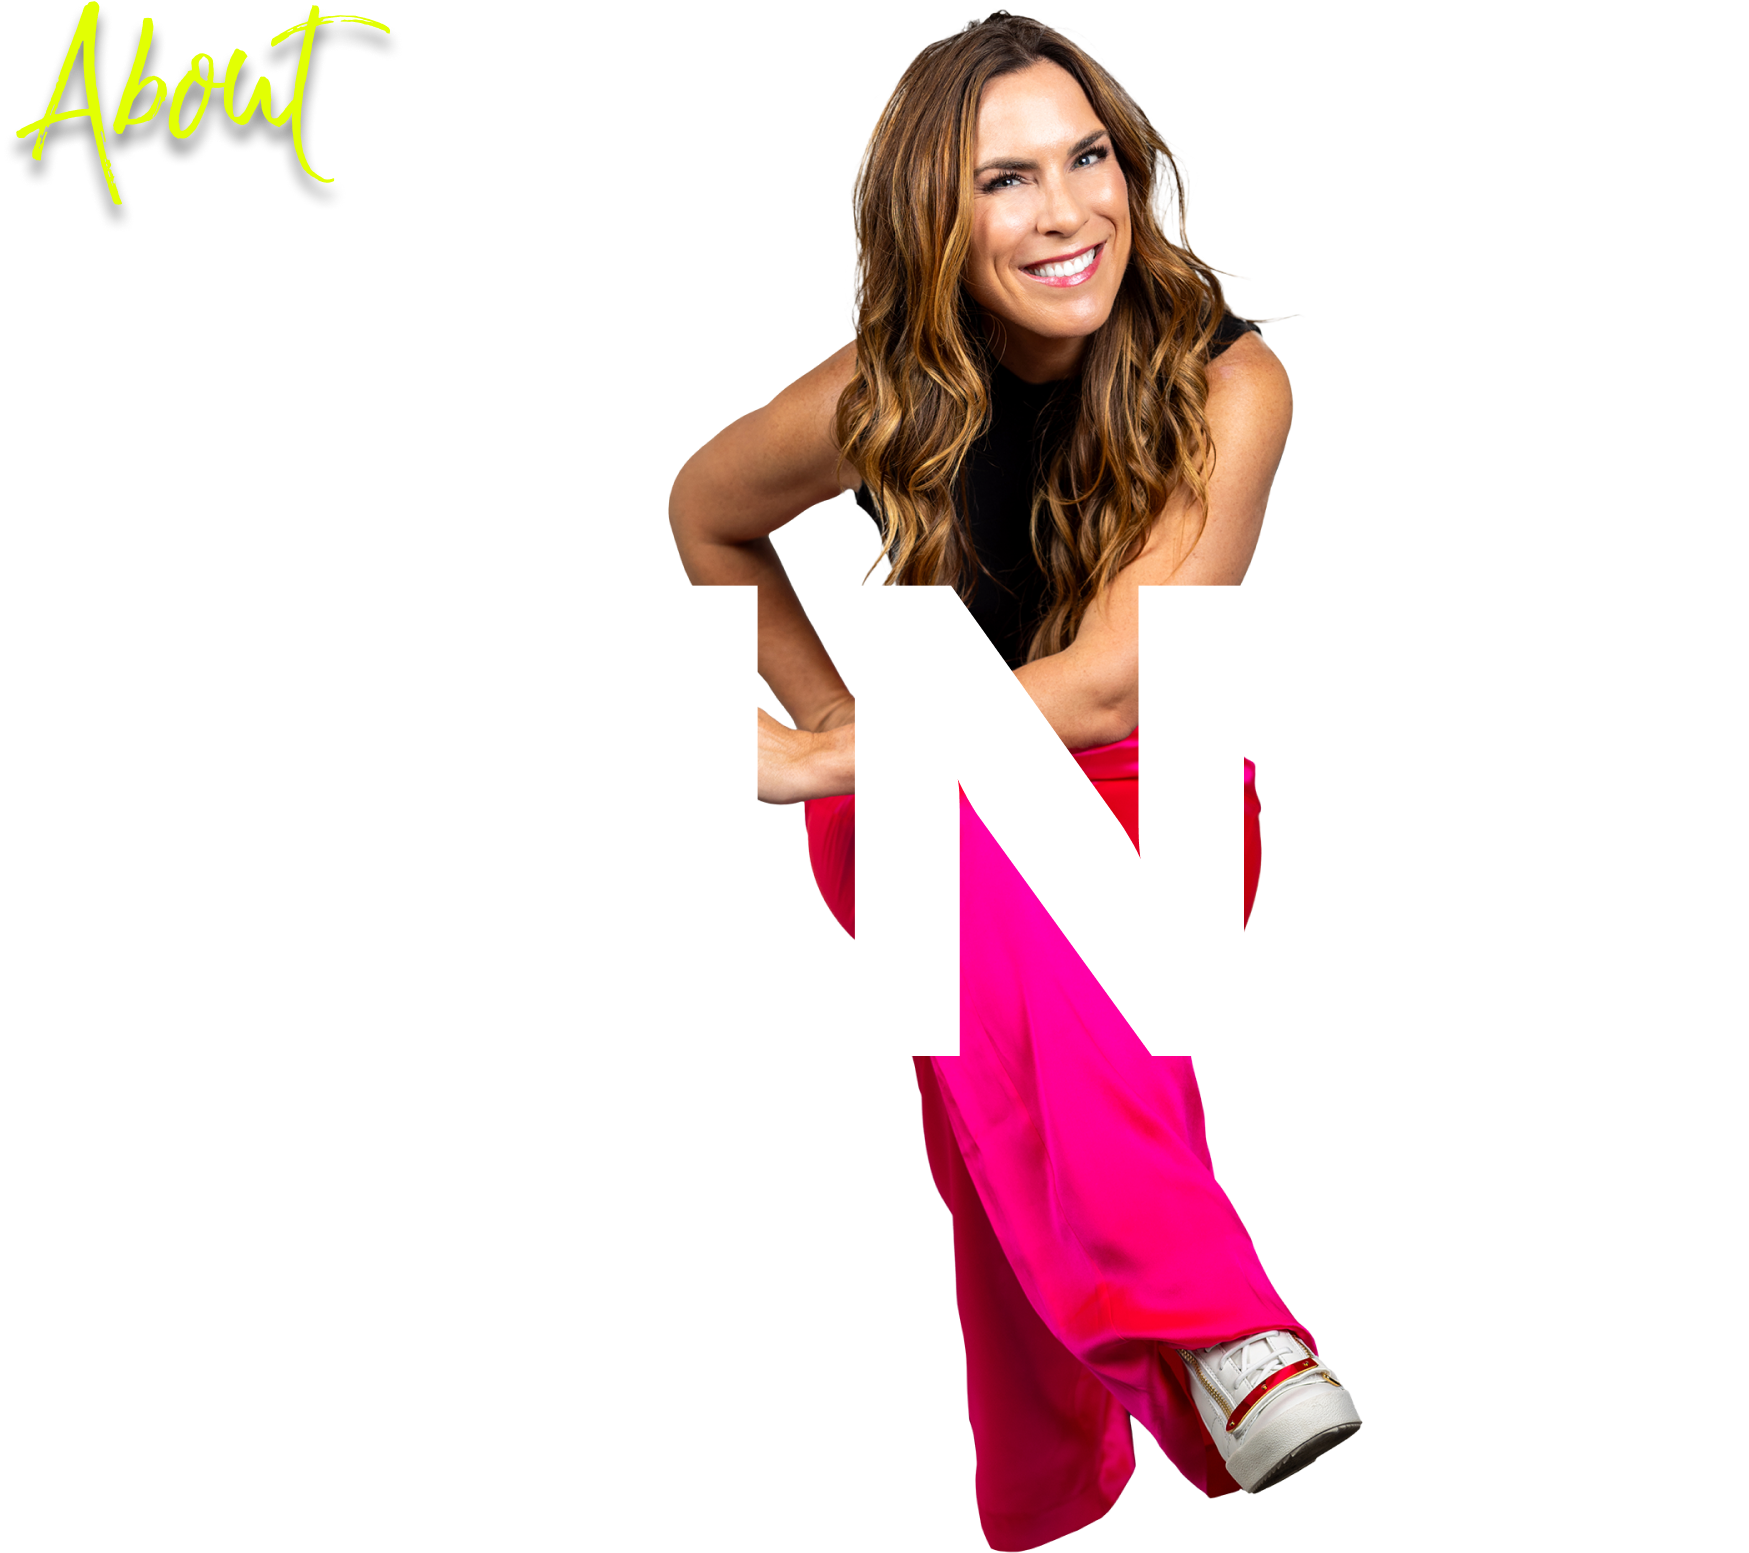 Image of Erin King, smiling confidently while wearing a stylish black blouse and pink pants. Her name 'Erin King' is creatively displayed across the entirety of the image.